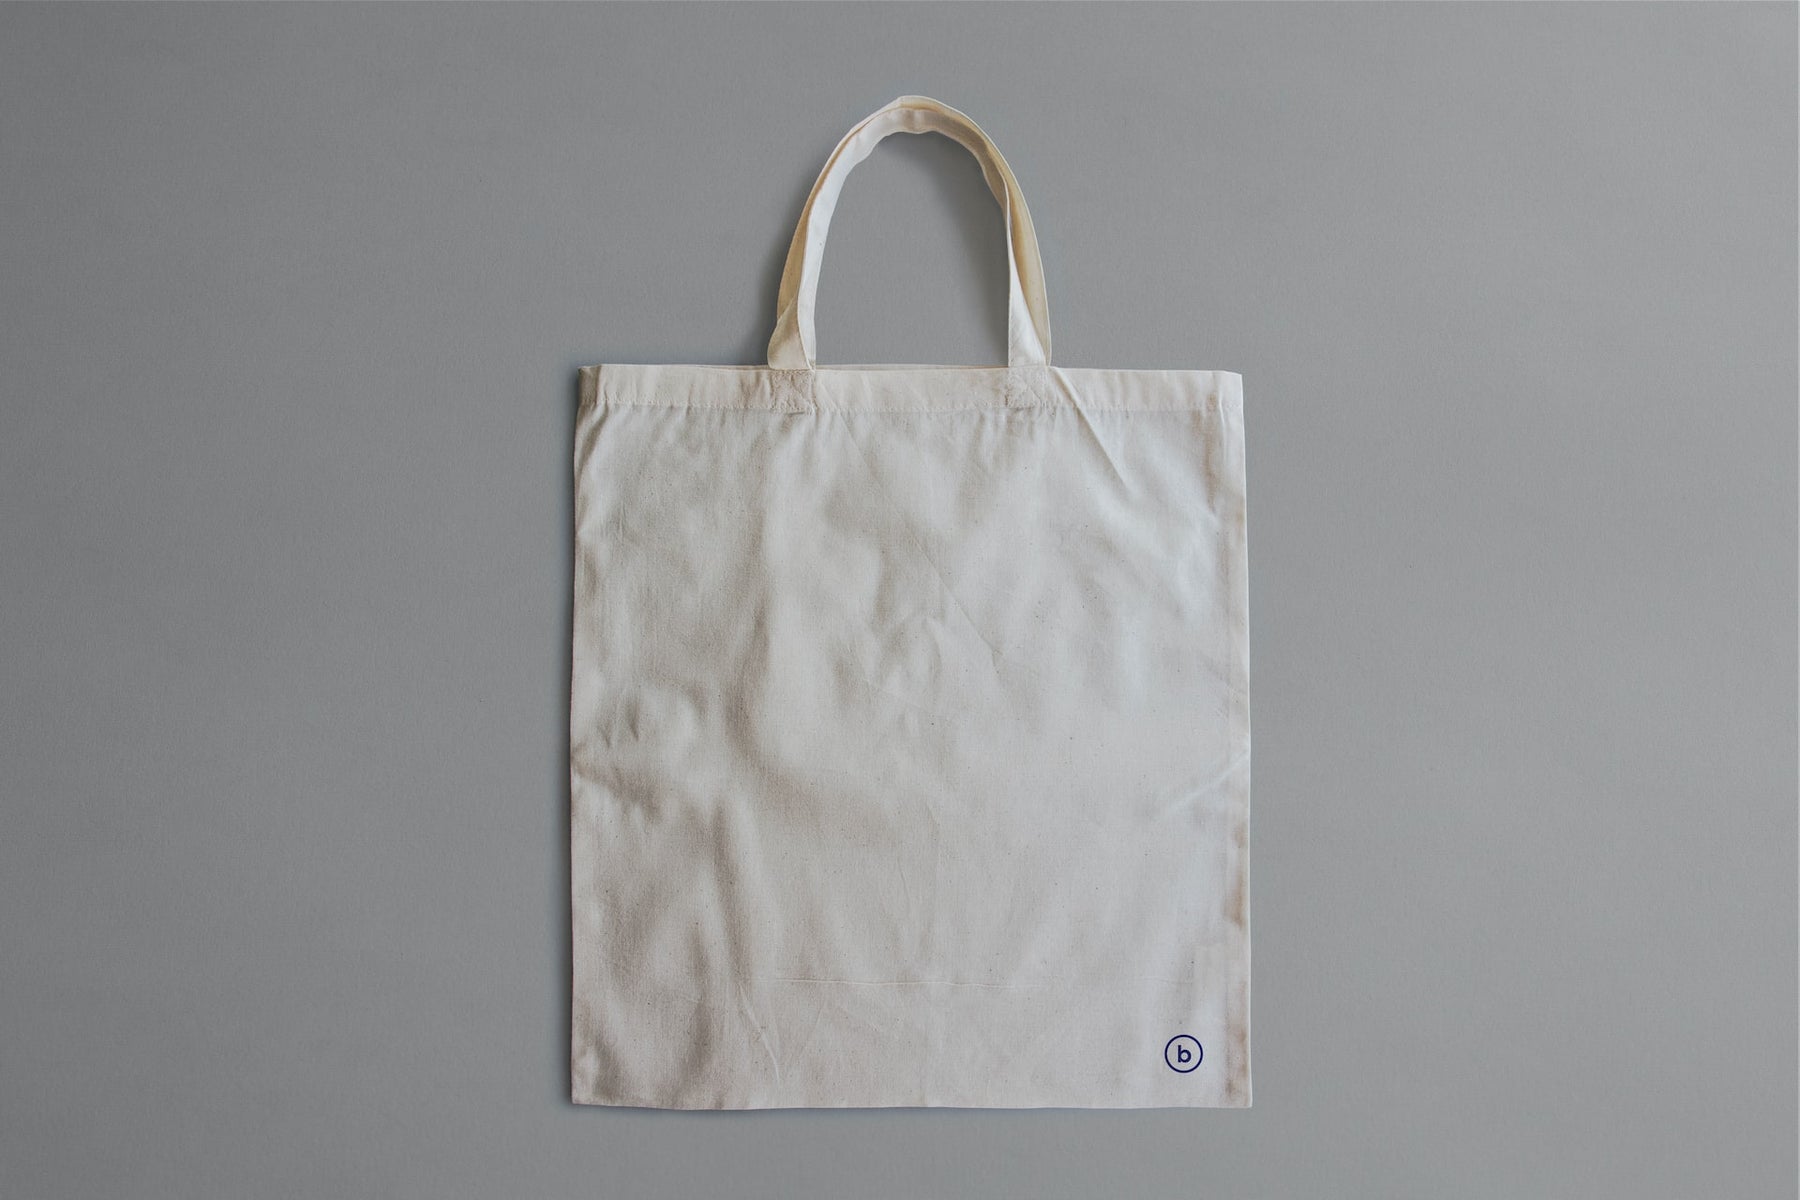 8 Reasons Why Tote Bags Are the Perfect Promotional Product